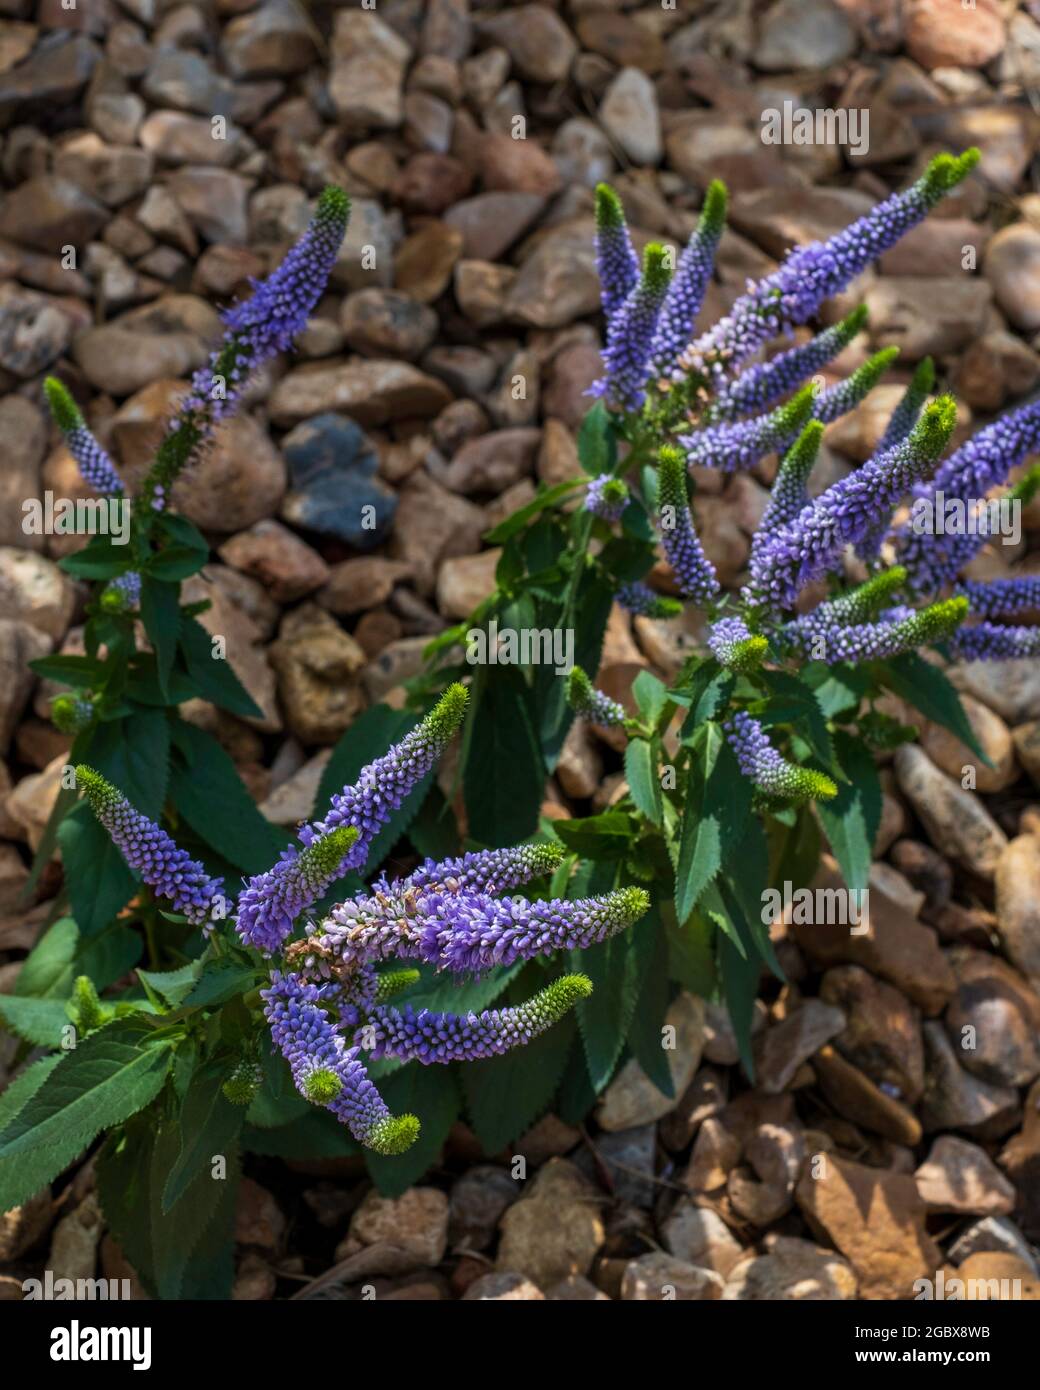 Monrovia 'First Glory' Veronica loongifolia, purple flowers blooming in a bed of pebbled mulch ground cover. Kansas, USA Stock Photo